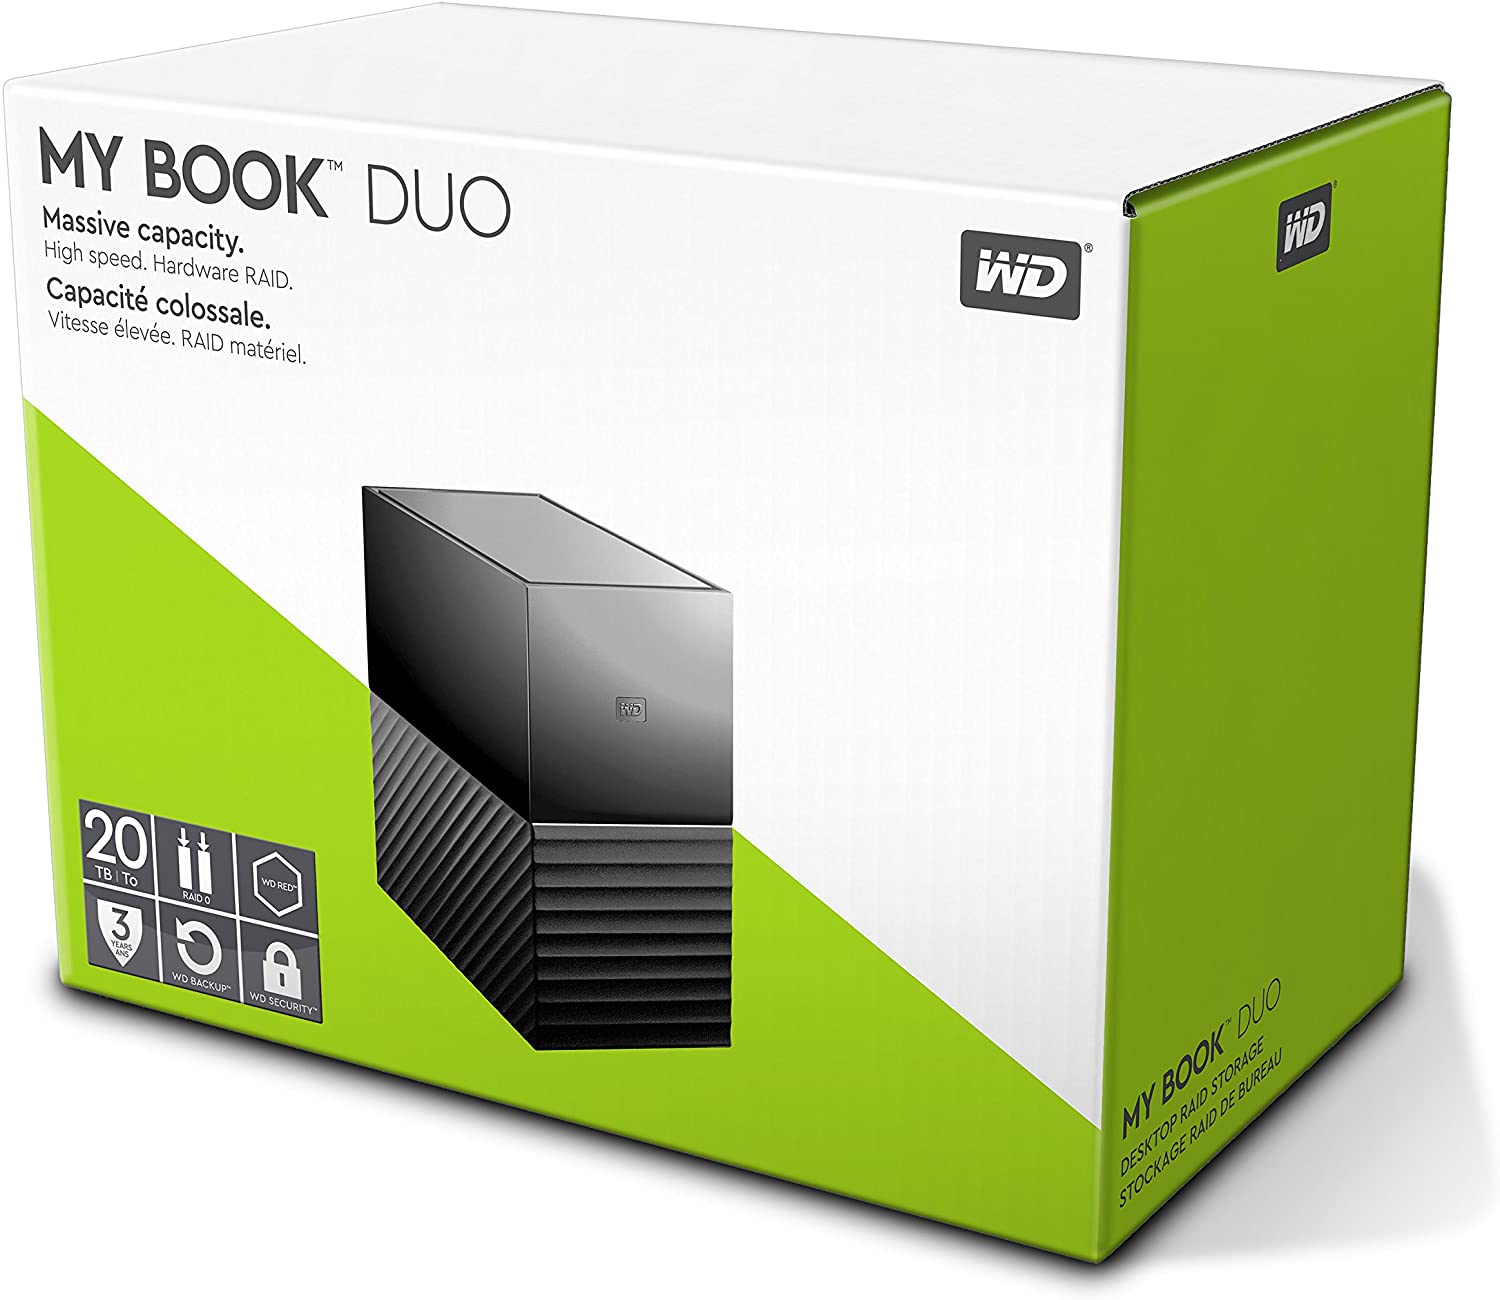 format wd my duo raid for mac with wd drive utilities